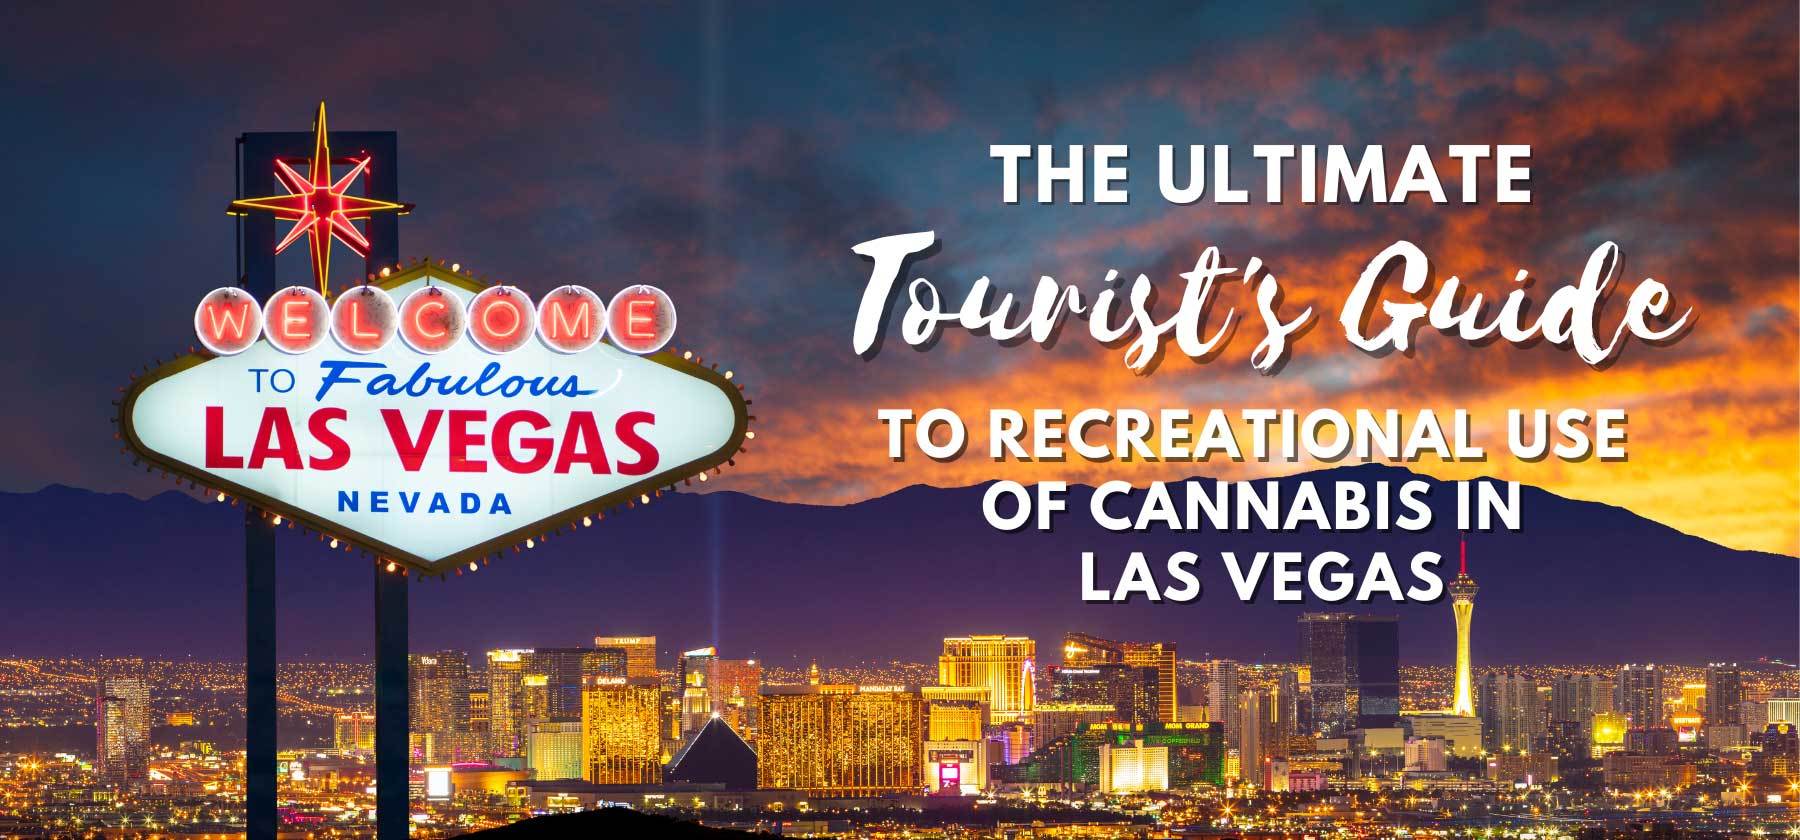 The Ultimate Tourist's Guide to Recreational Use of Cannabis in Las VegasPost Image